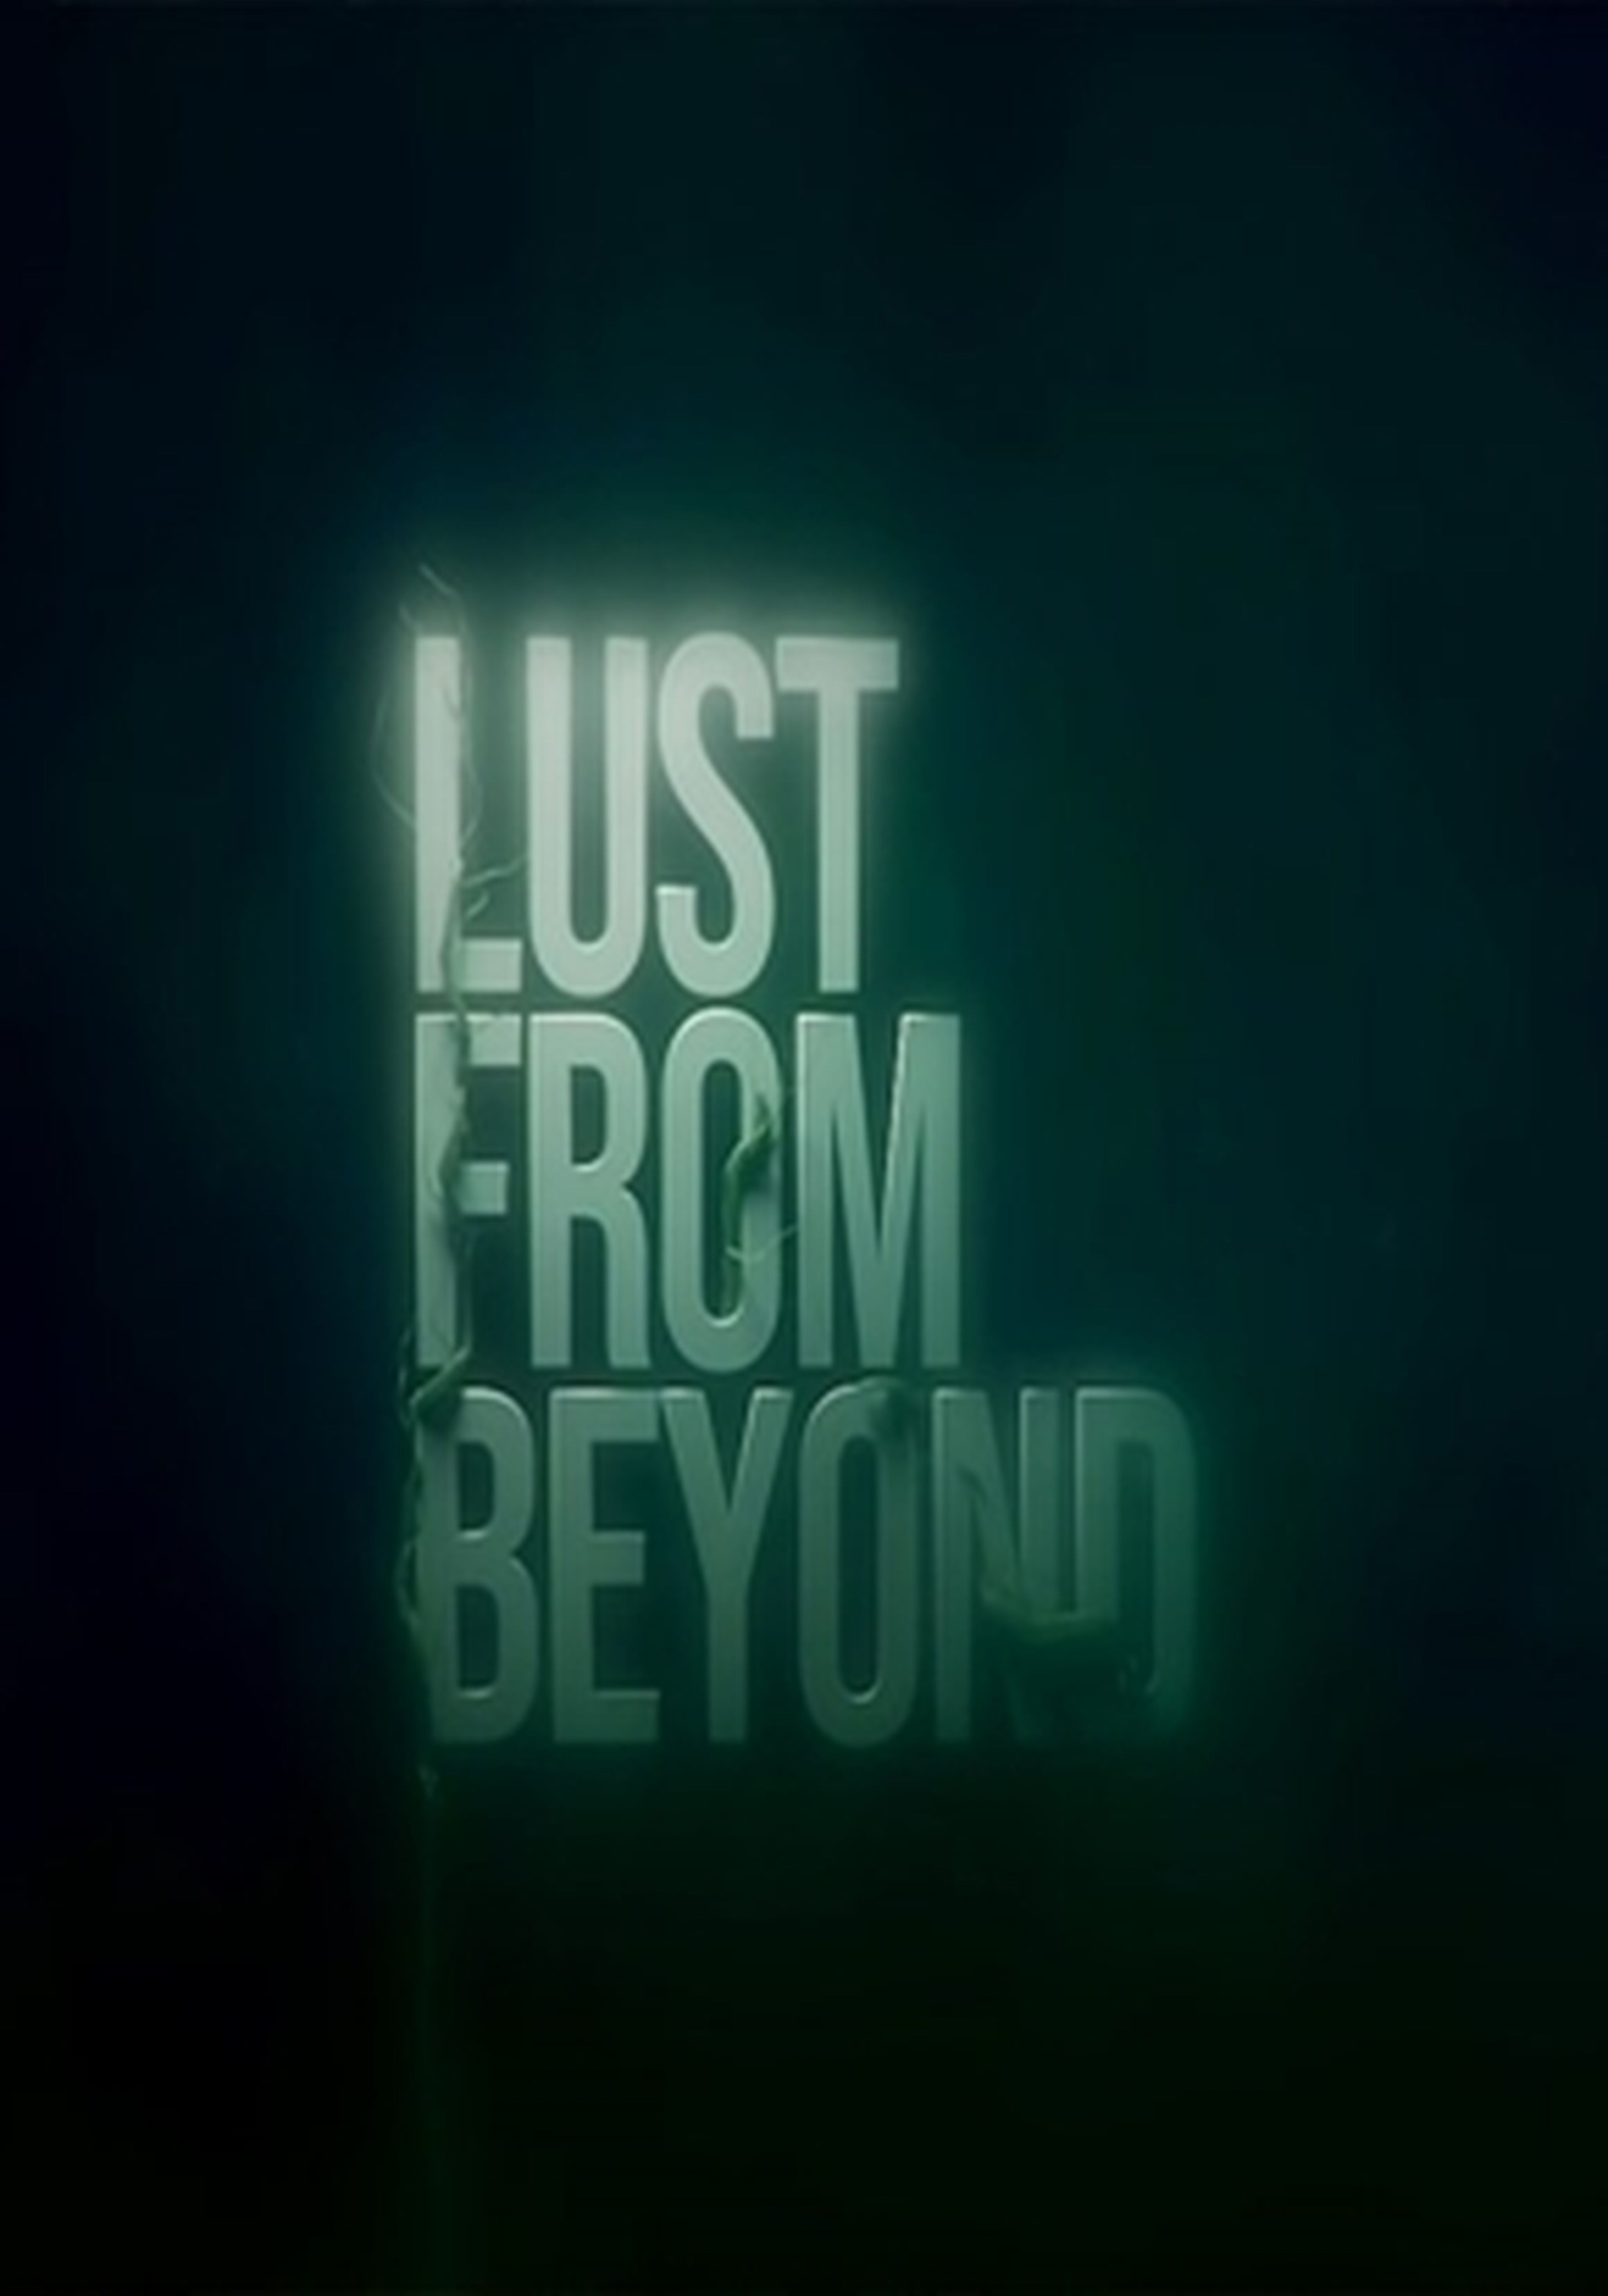 Lust From Beyond cartel